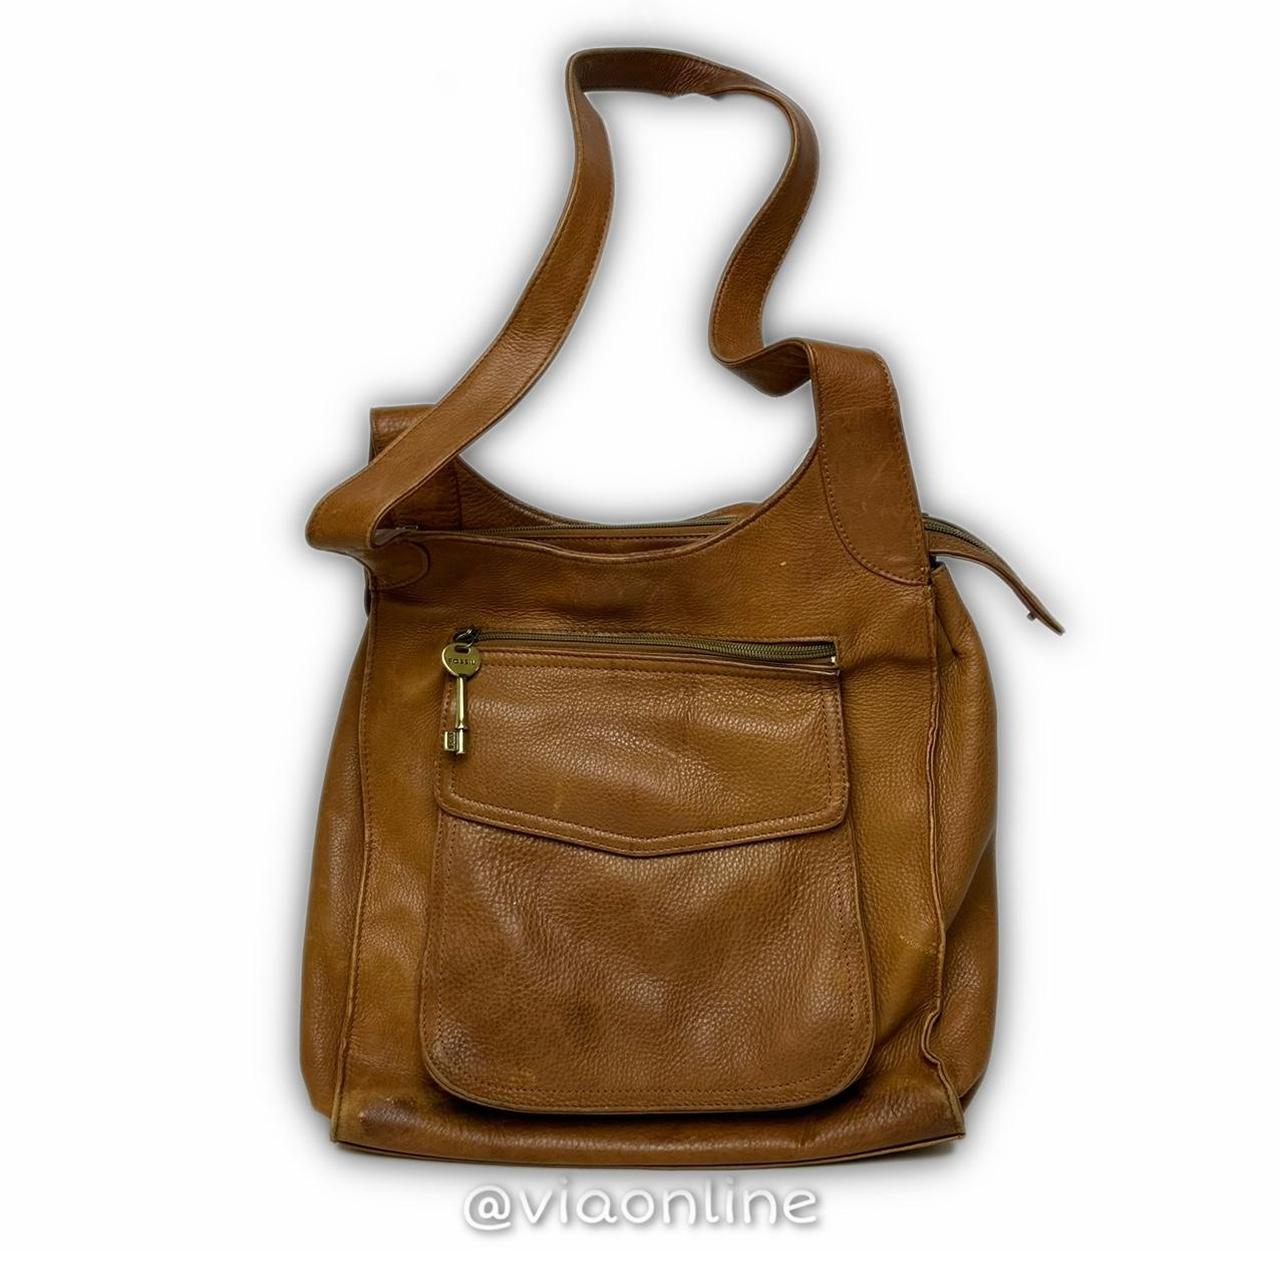 Womens Fossil Satchel Bags Philippines Sale | fossilphlilppines.com